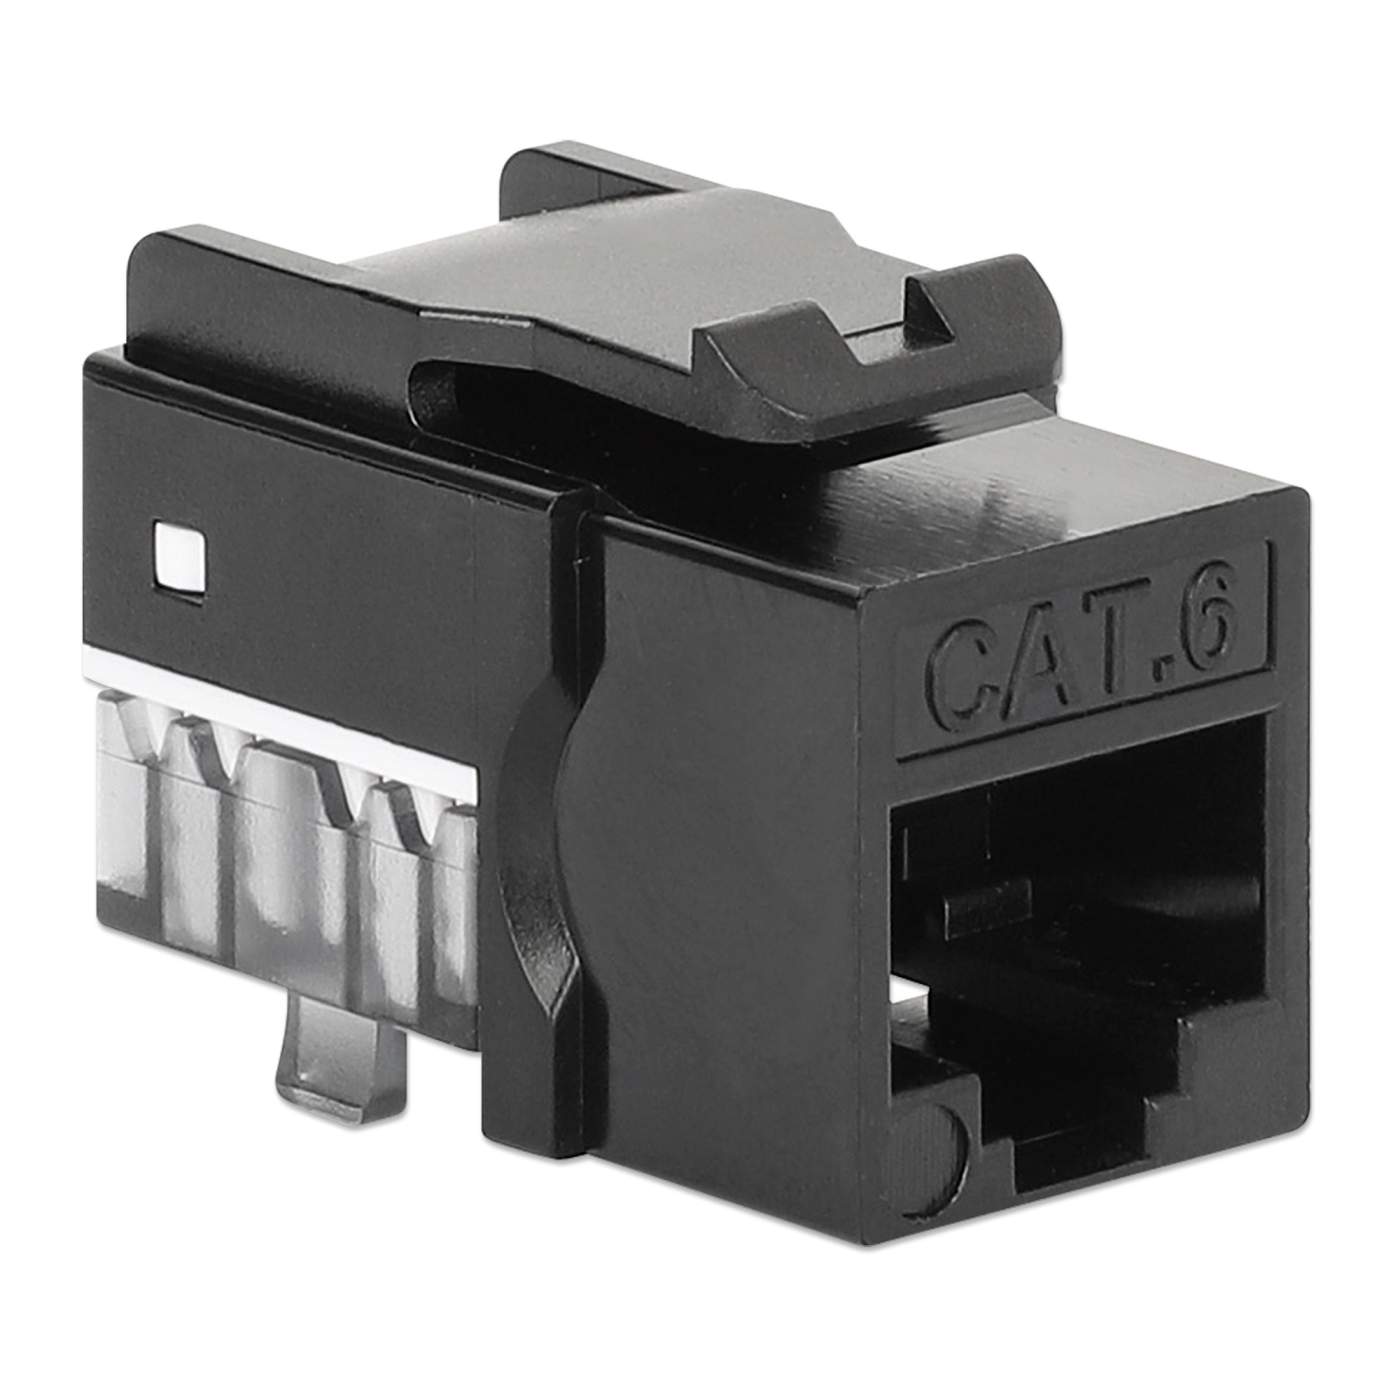 Cat6 Slim Keystone Jack with Punch-Down Stand, Black, 25-Pack Image 3